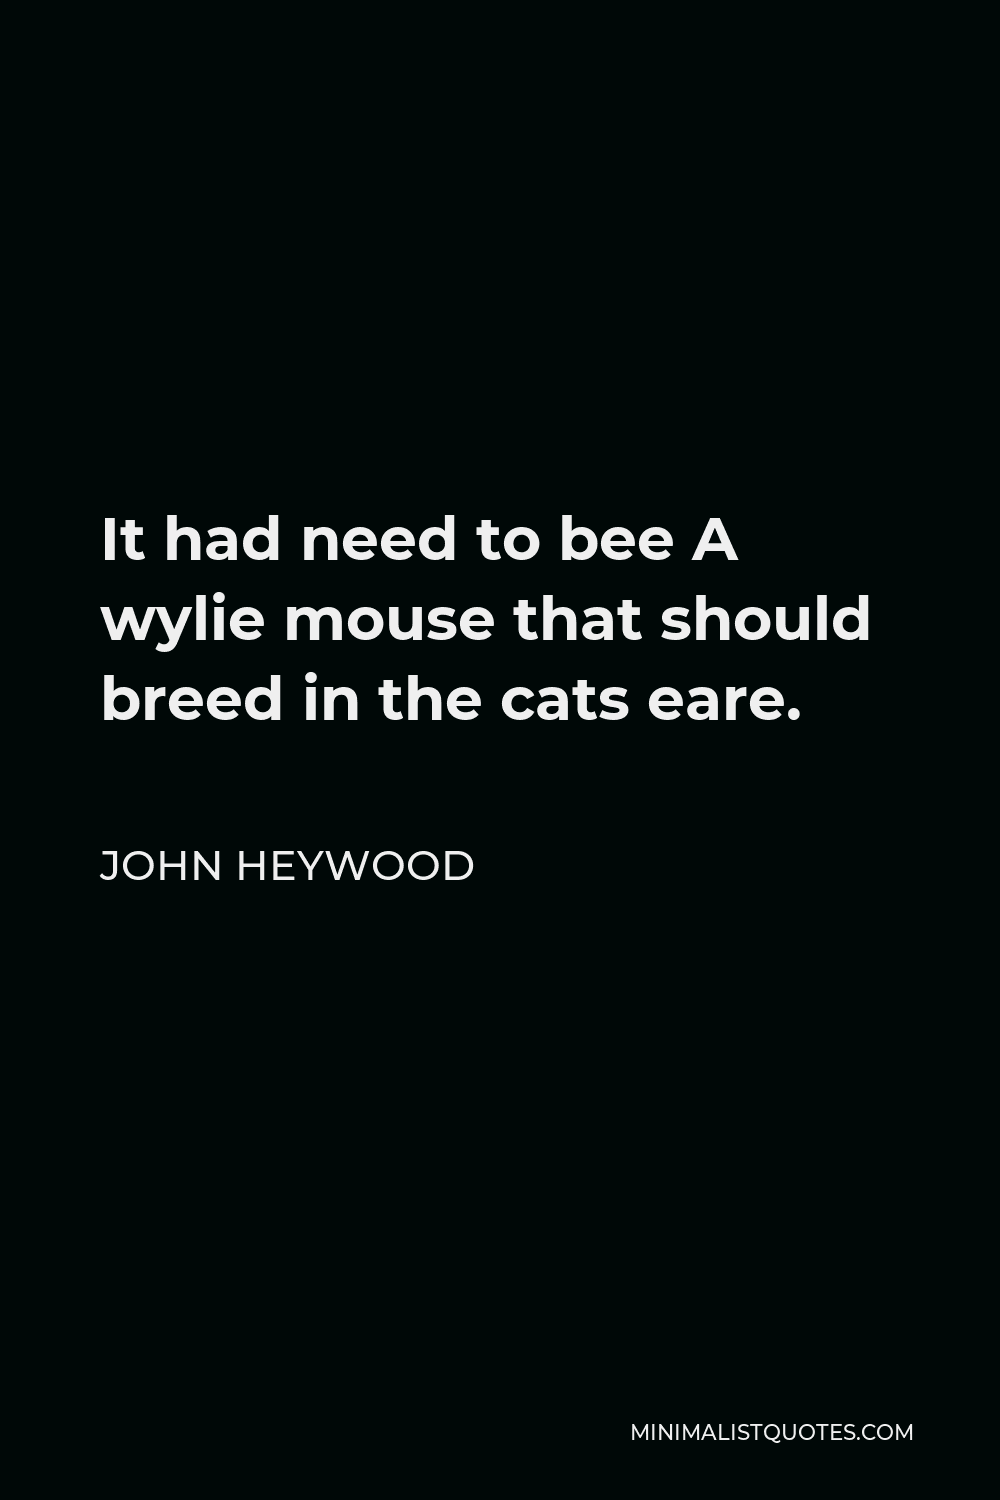 John Heywood Quote - It had need to bee A wylie mouse that should breed in the cats eare.